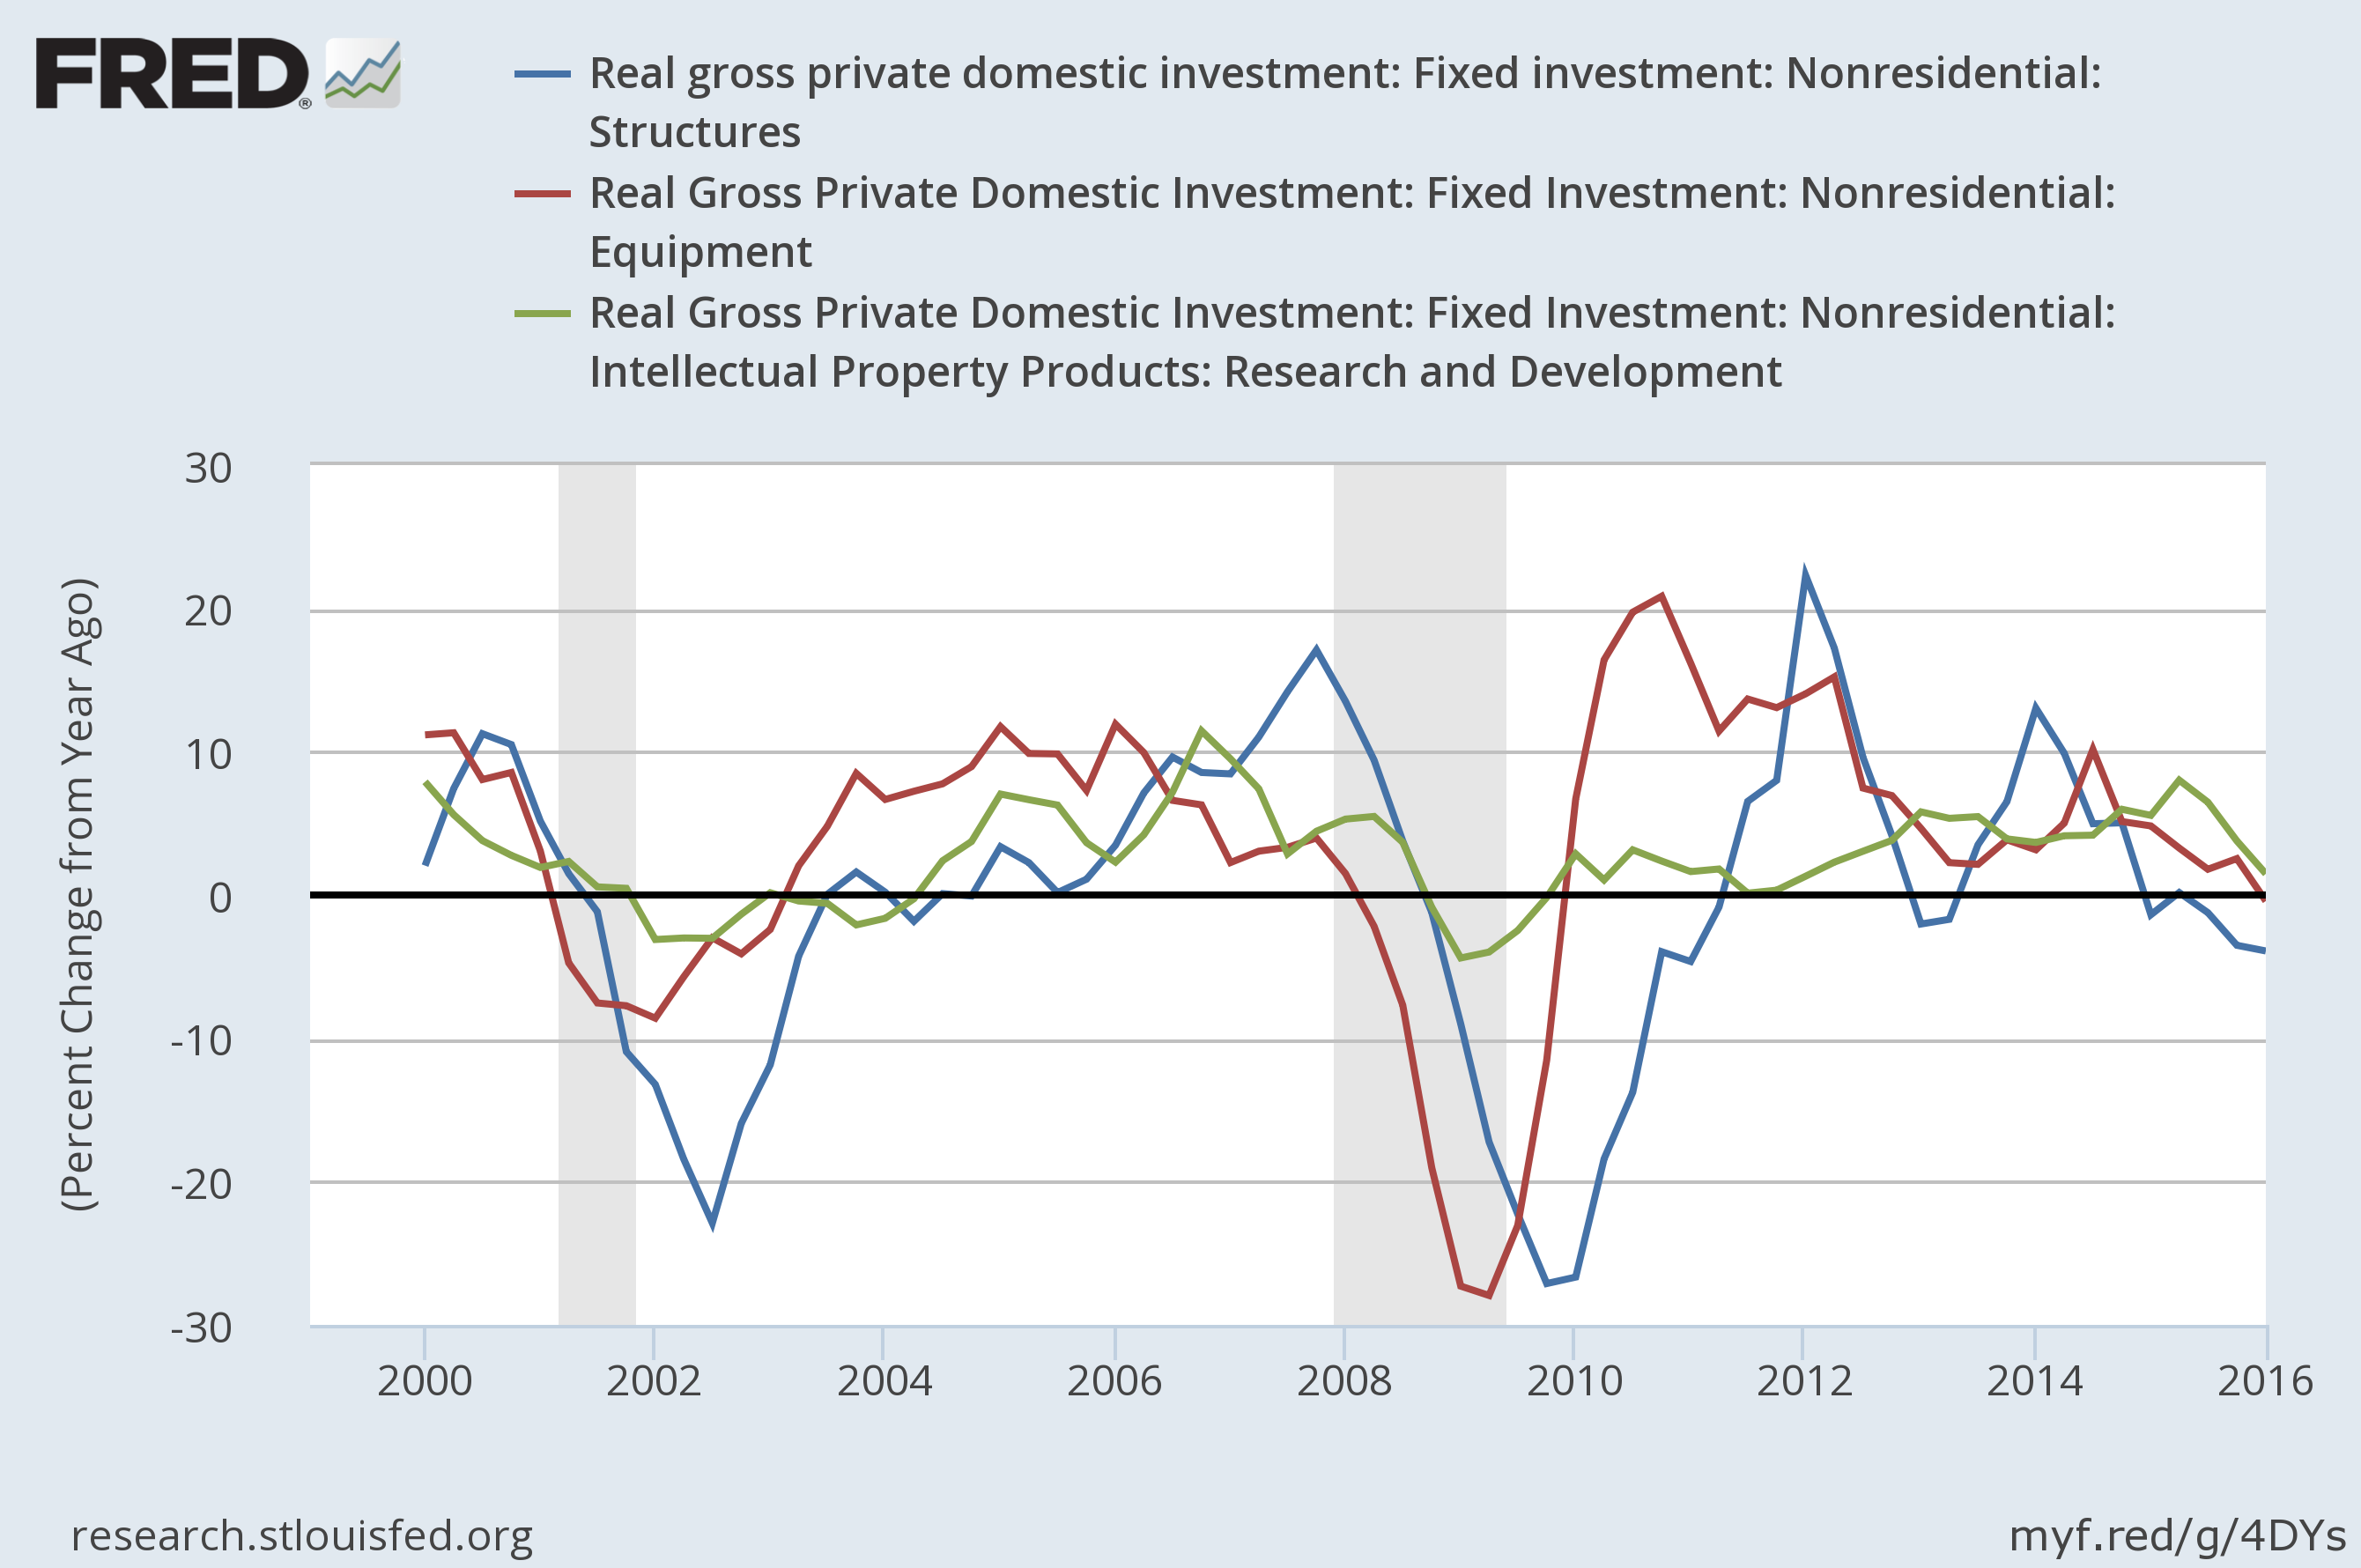 Real Gross Private Domestic Investment